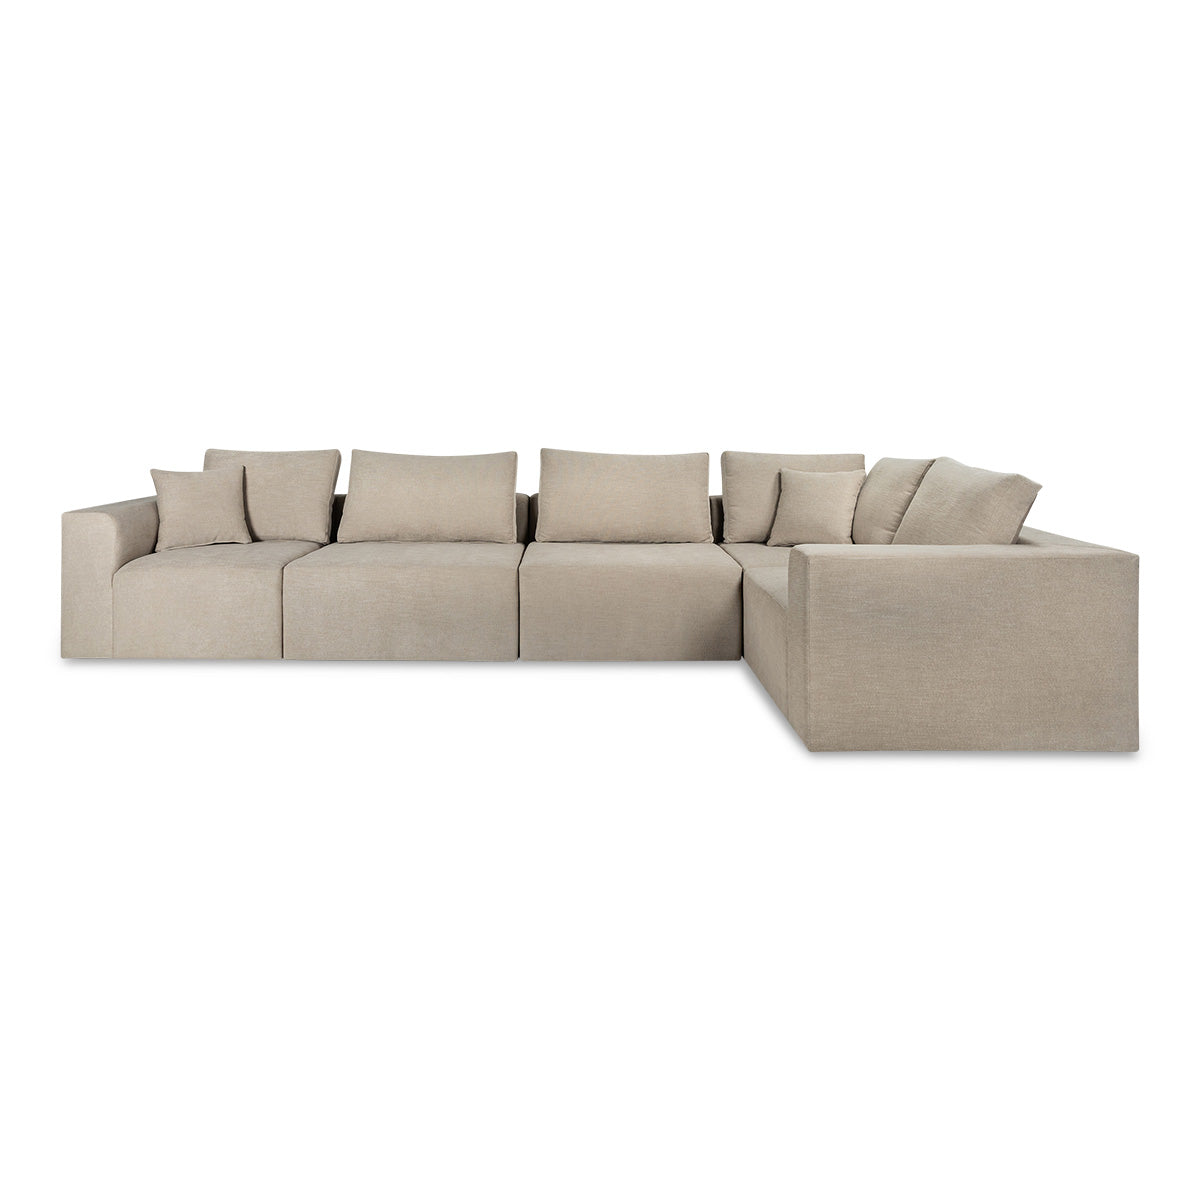 Vail Sectional in Burlap